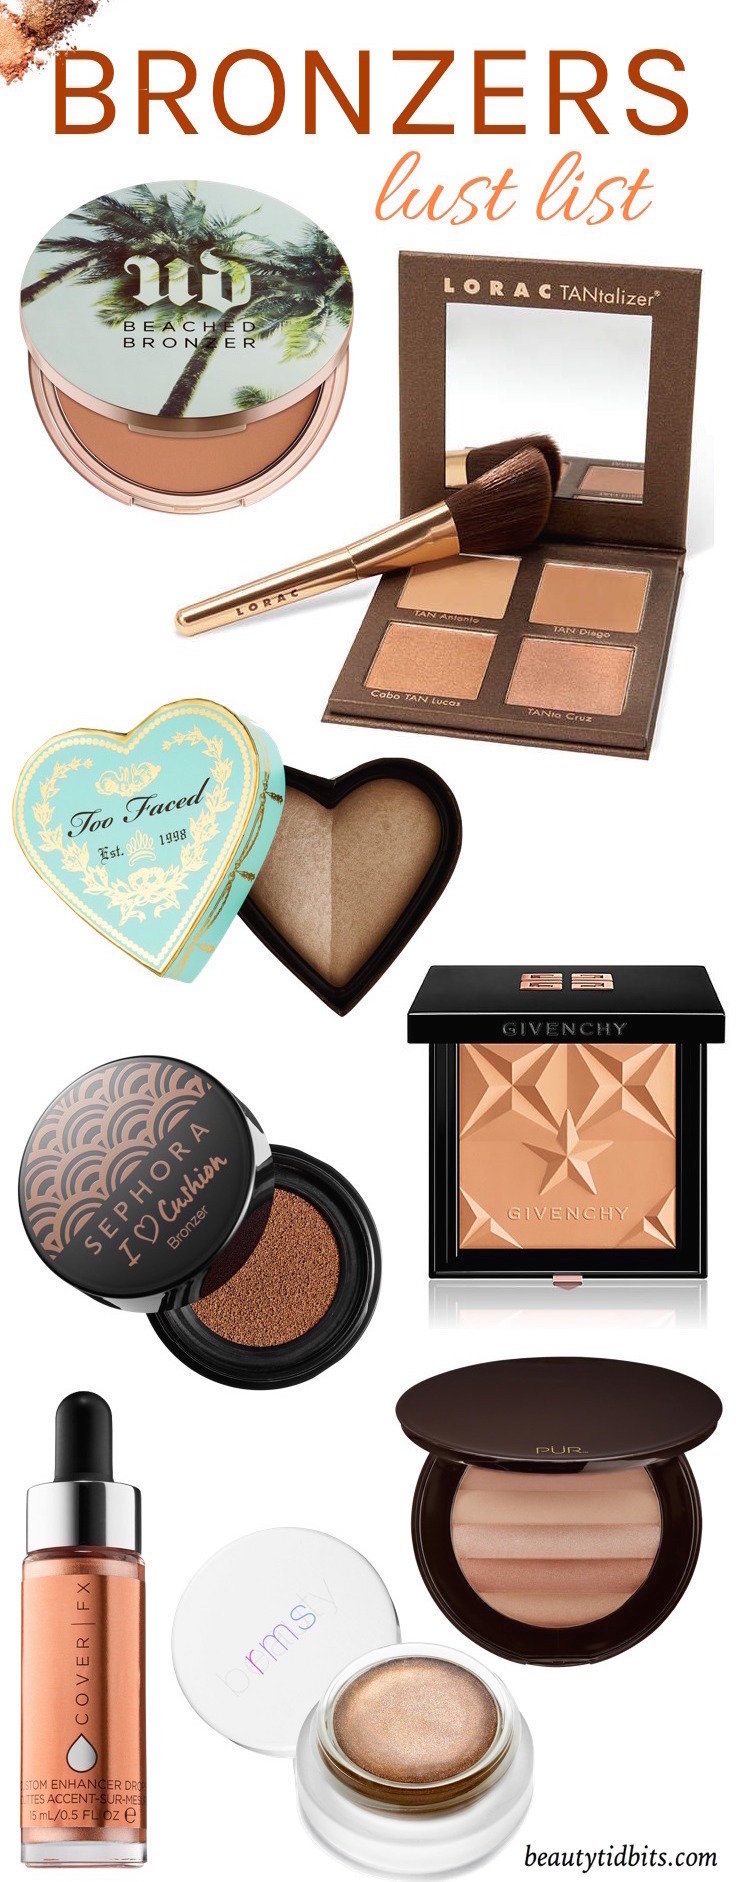 Need a new bronzer for summer? These fabulous tanning powders will give you a stunning sun-kissed glow that looks natural! And there’s one for every skin tone from porcelain to mocha! Click through to find the perfect pick for you! 